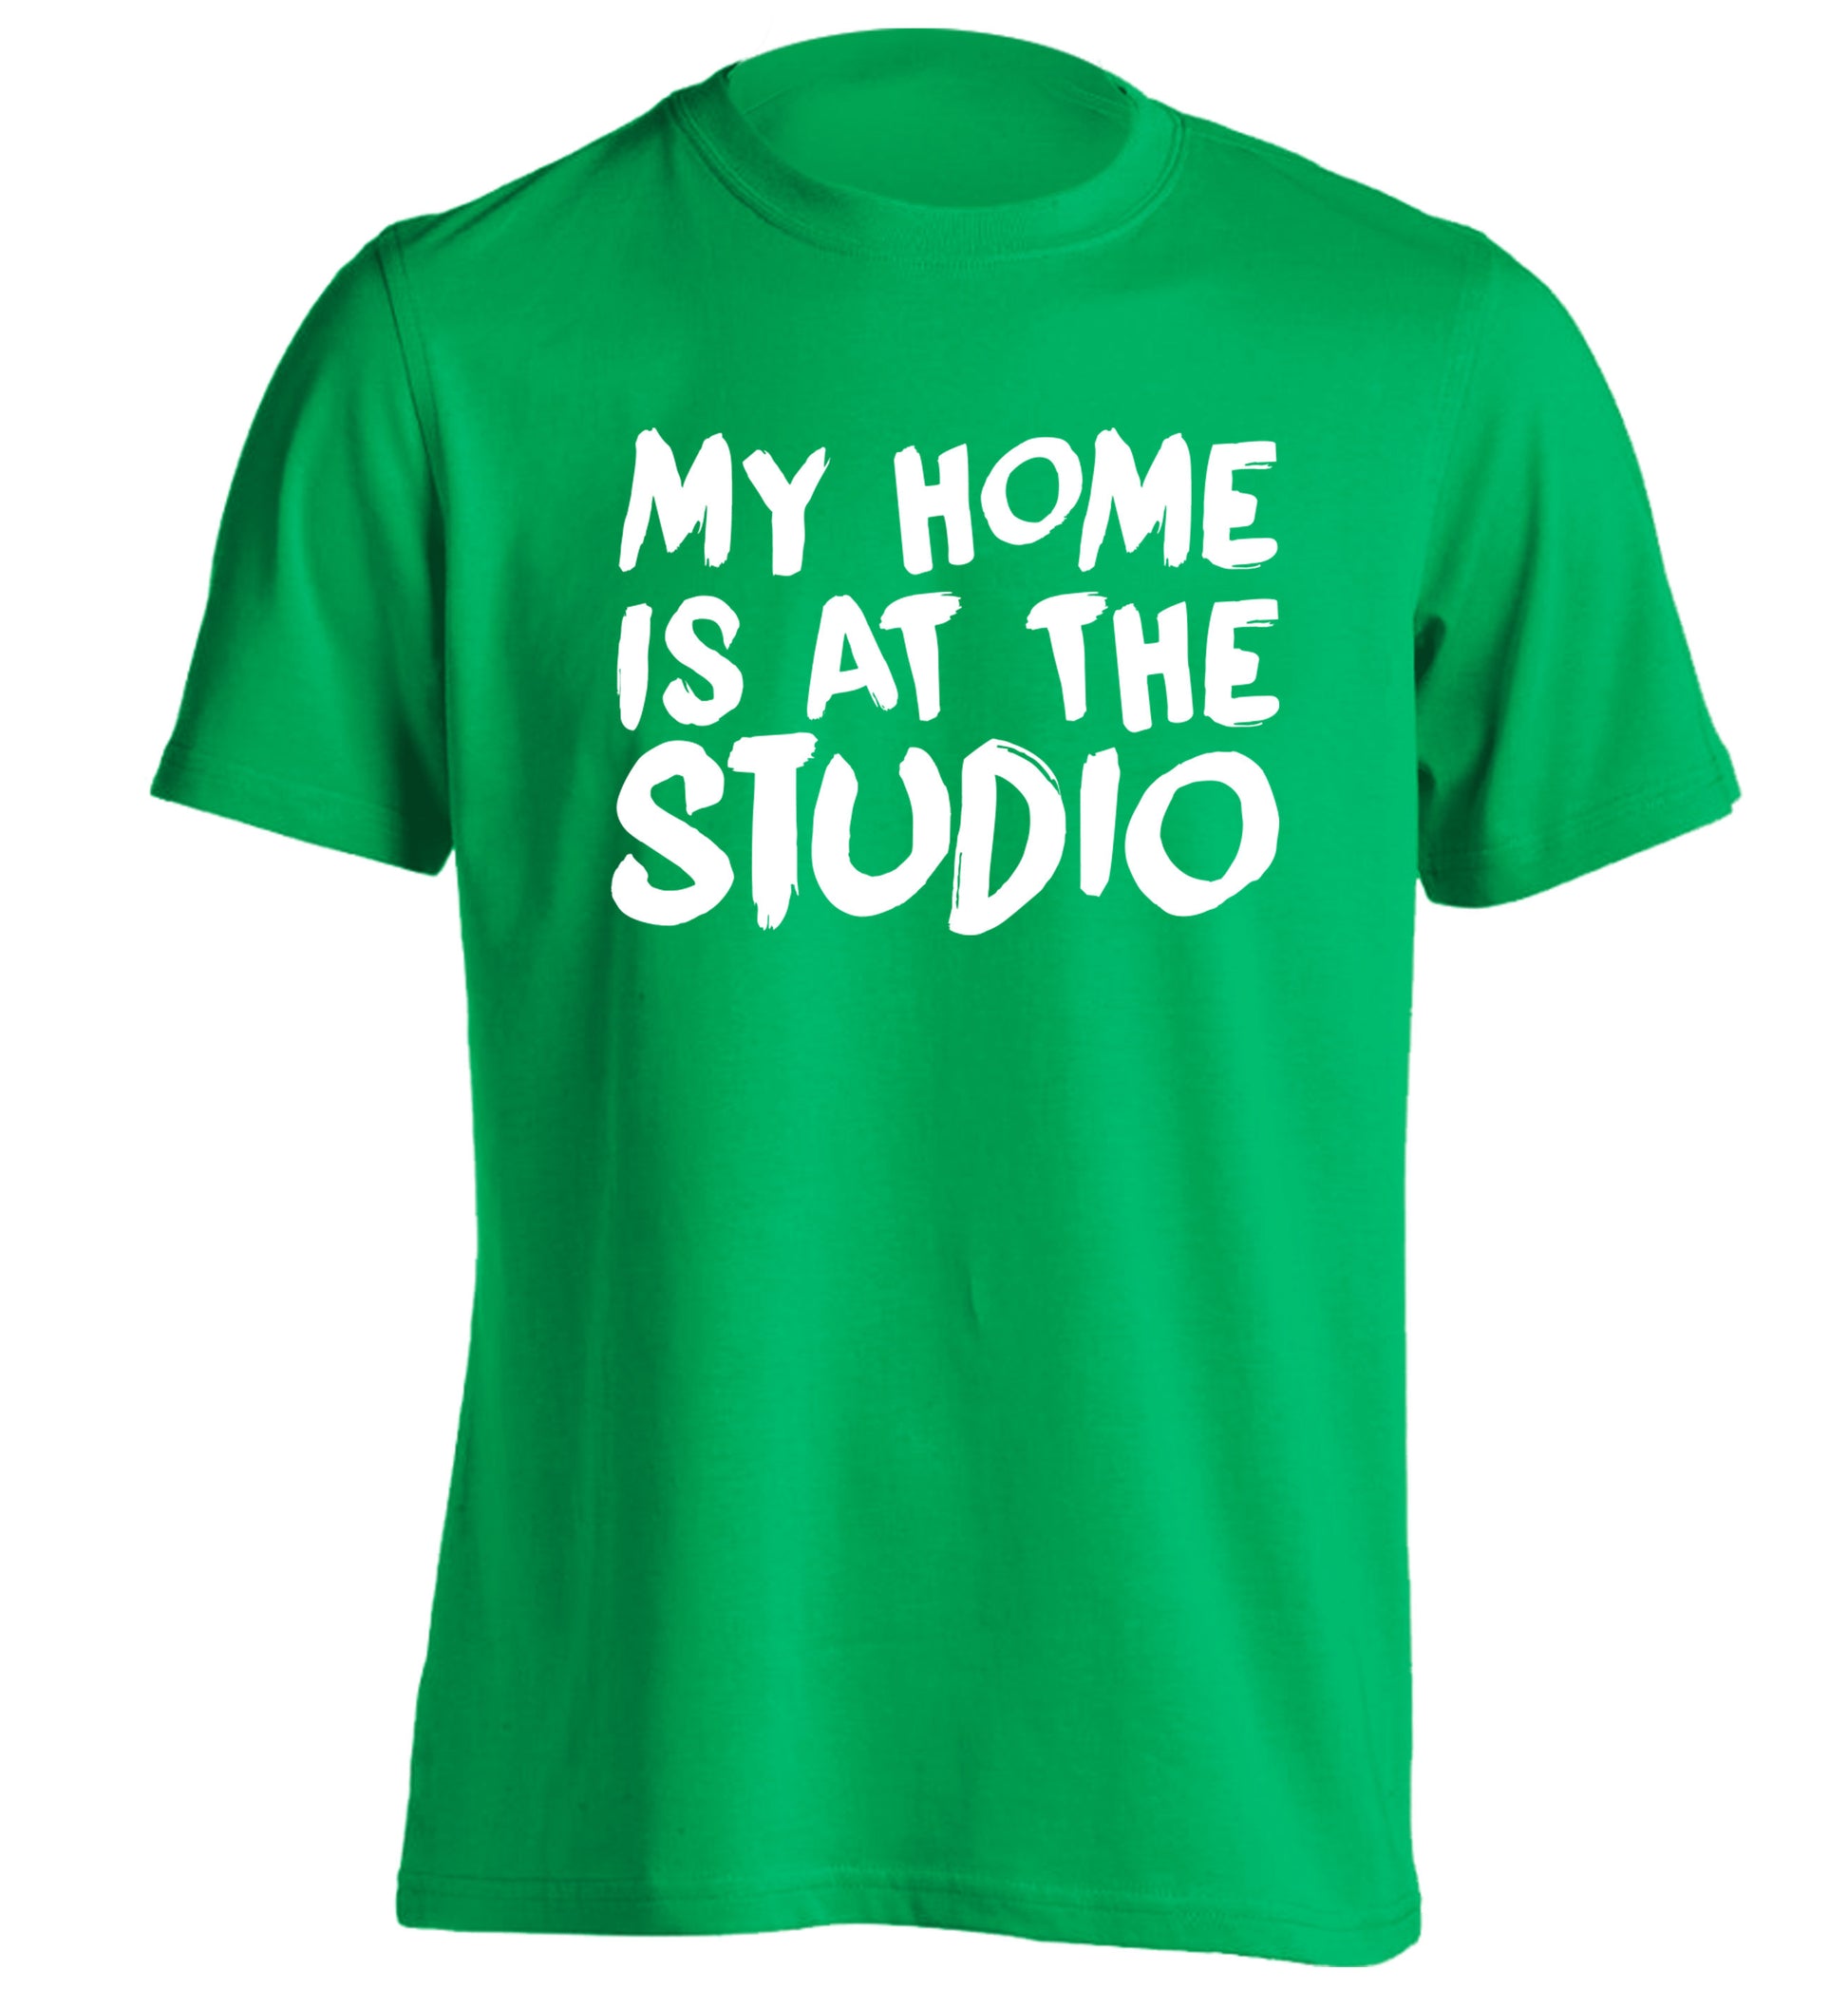 My home is at the studio adults unisex green Tshirt 2XL